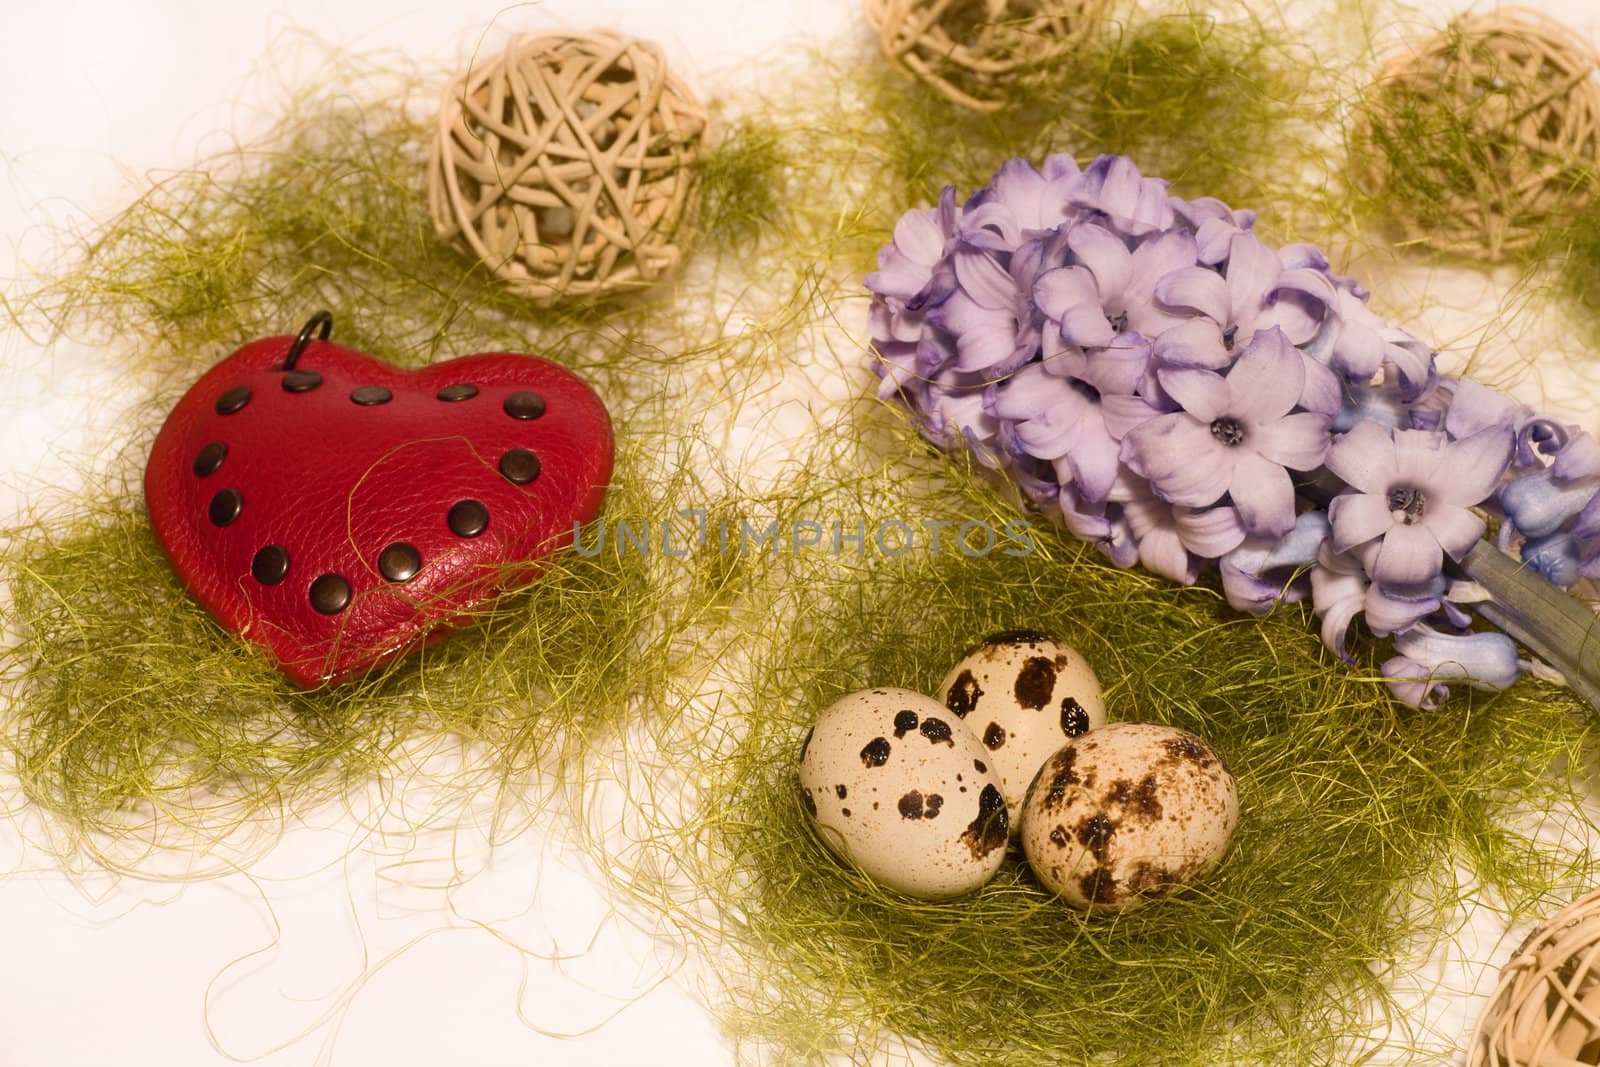 Easter eggs  in nest, blue hyacinth, read heart and wooden balls